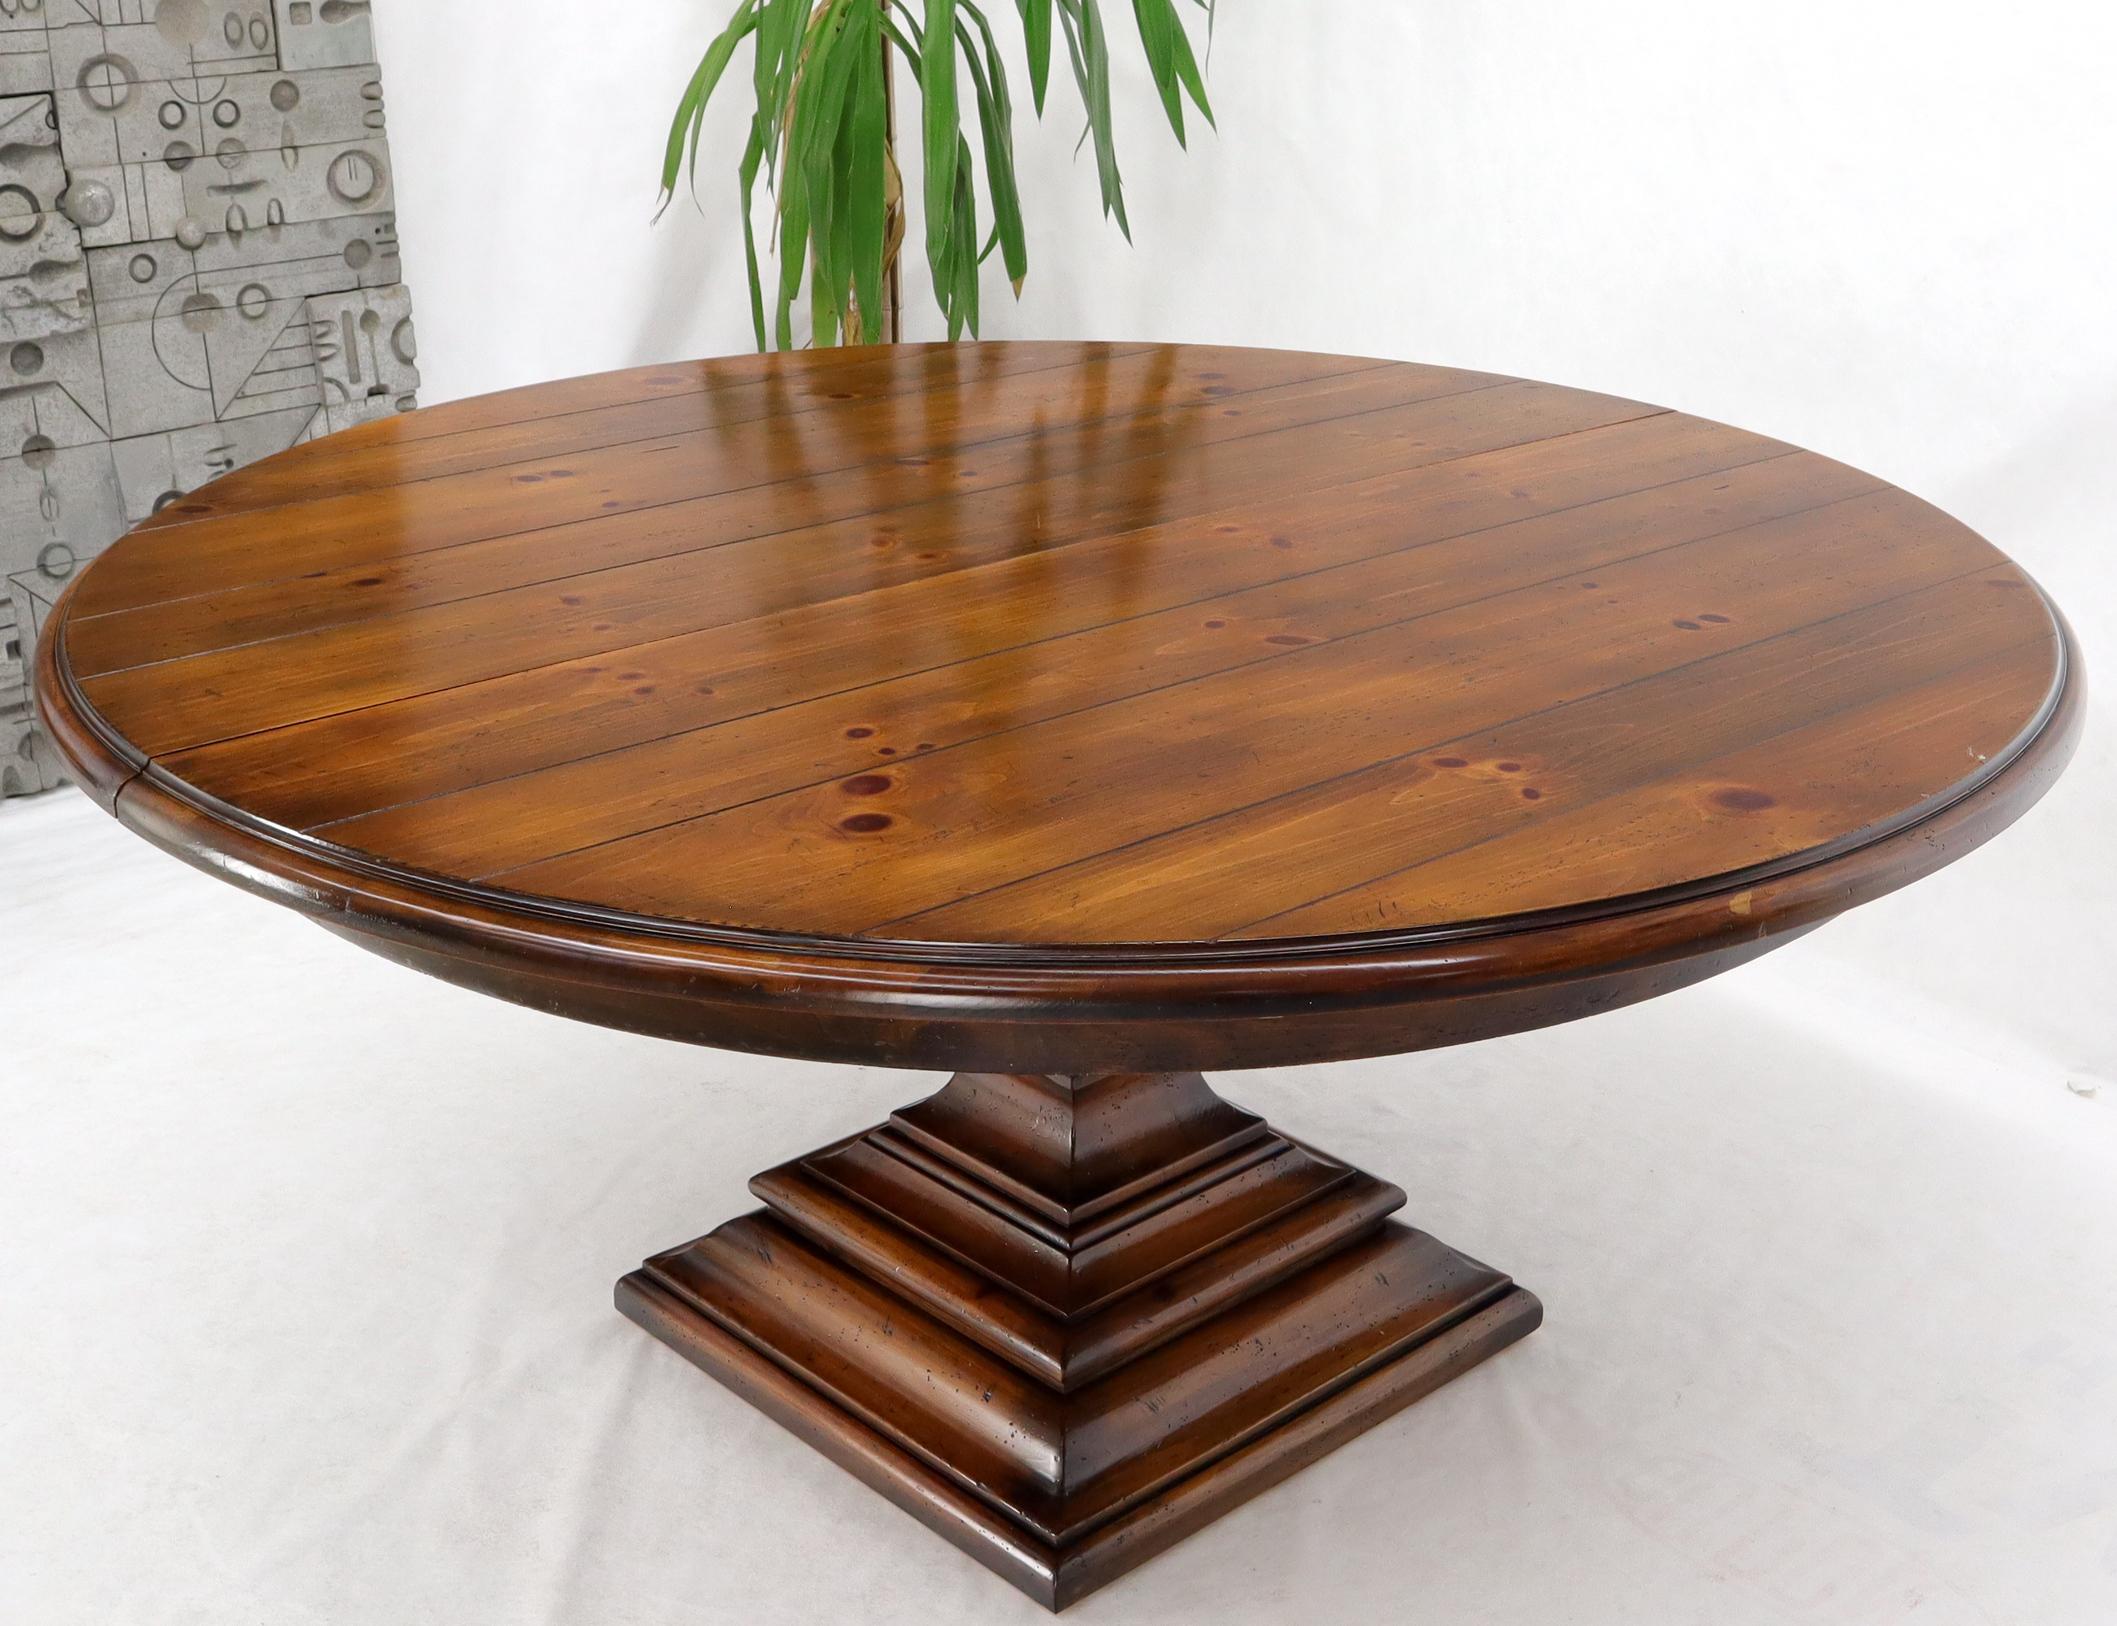 Spanish Colonial Large Round Colonial Spanish Square Base Pine Dining Table by Ralph Lauren